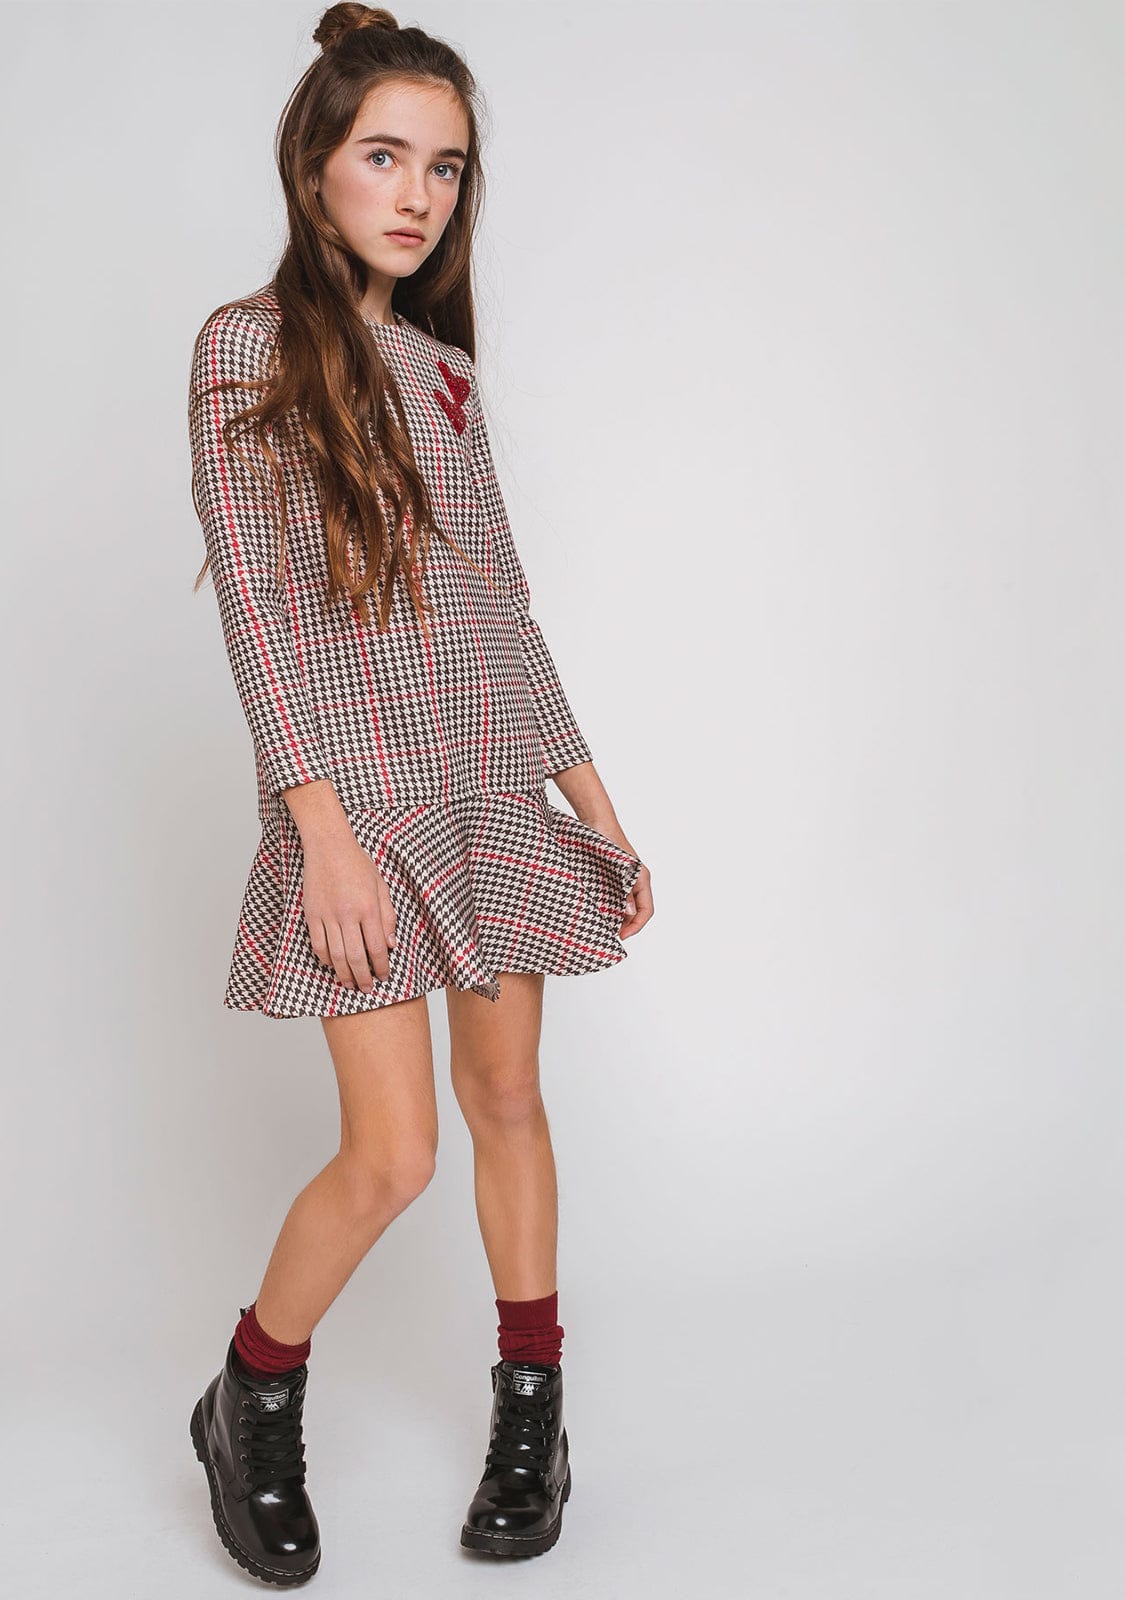 CONGUITOS TEXTIL Clothing Girl's Houndstooth Brown Bordeaux Dress